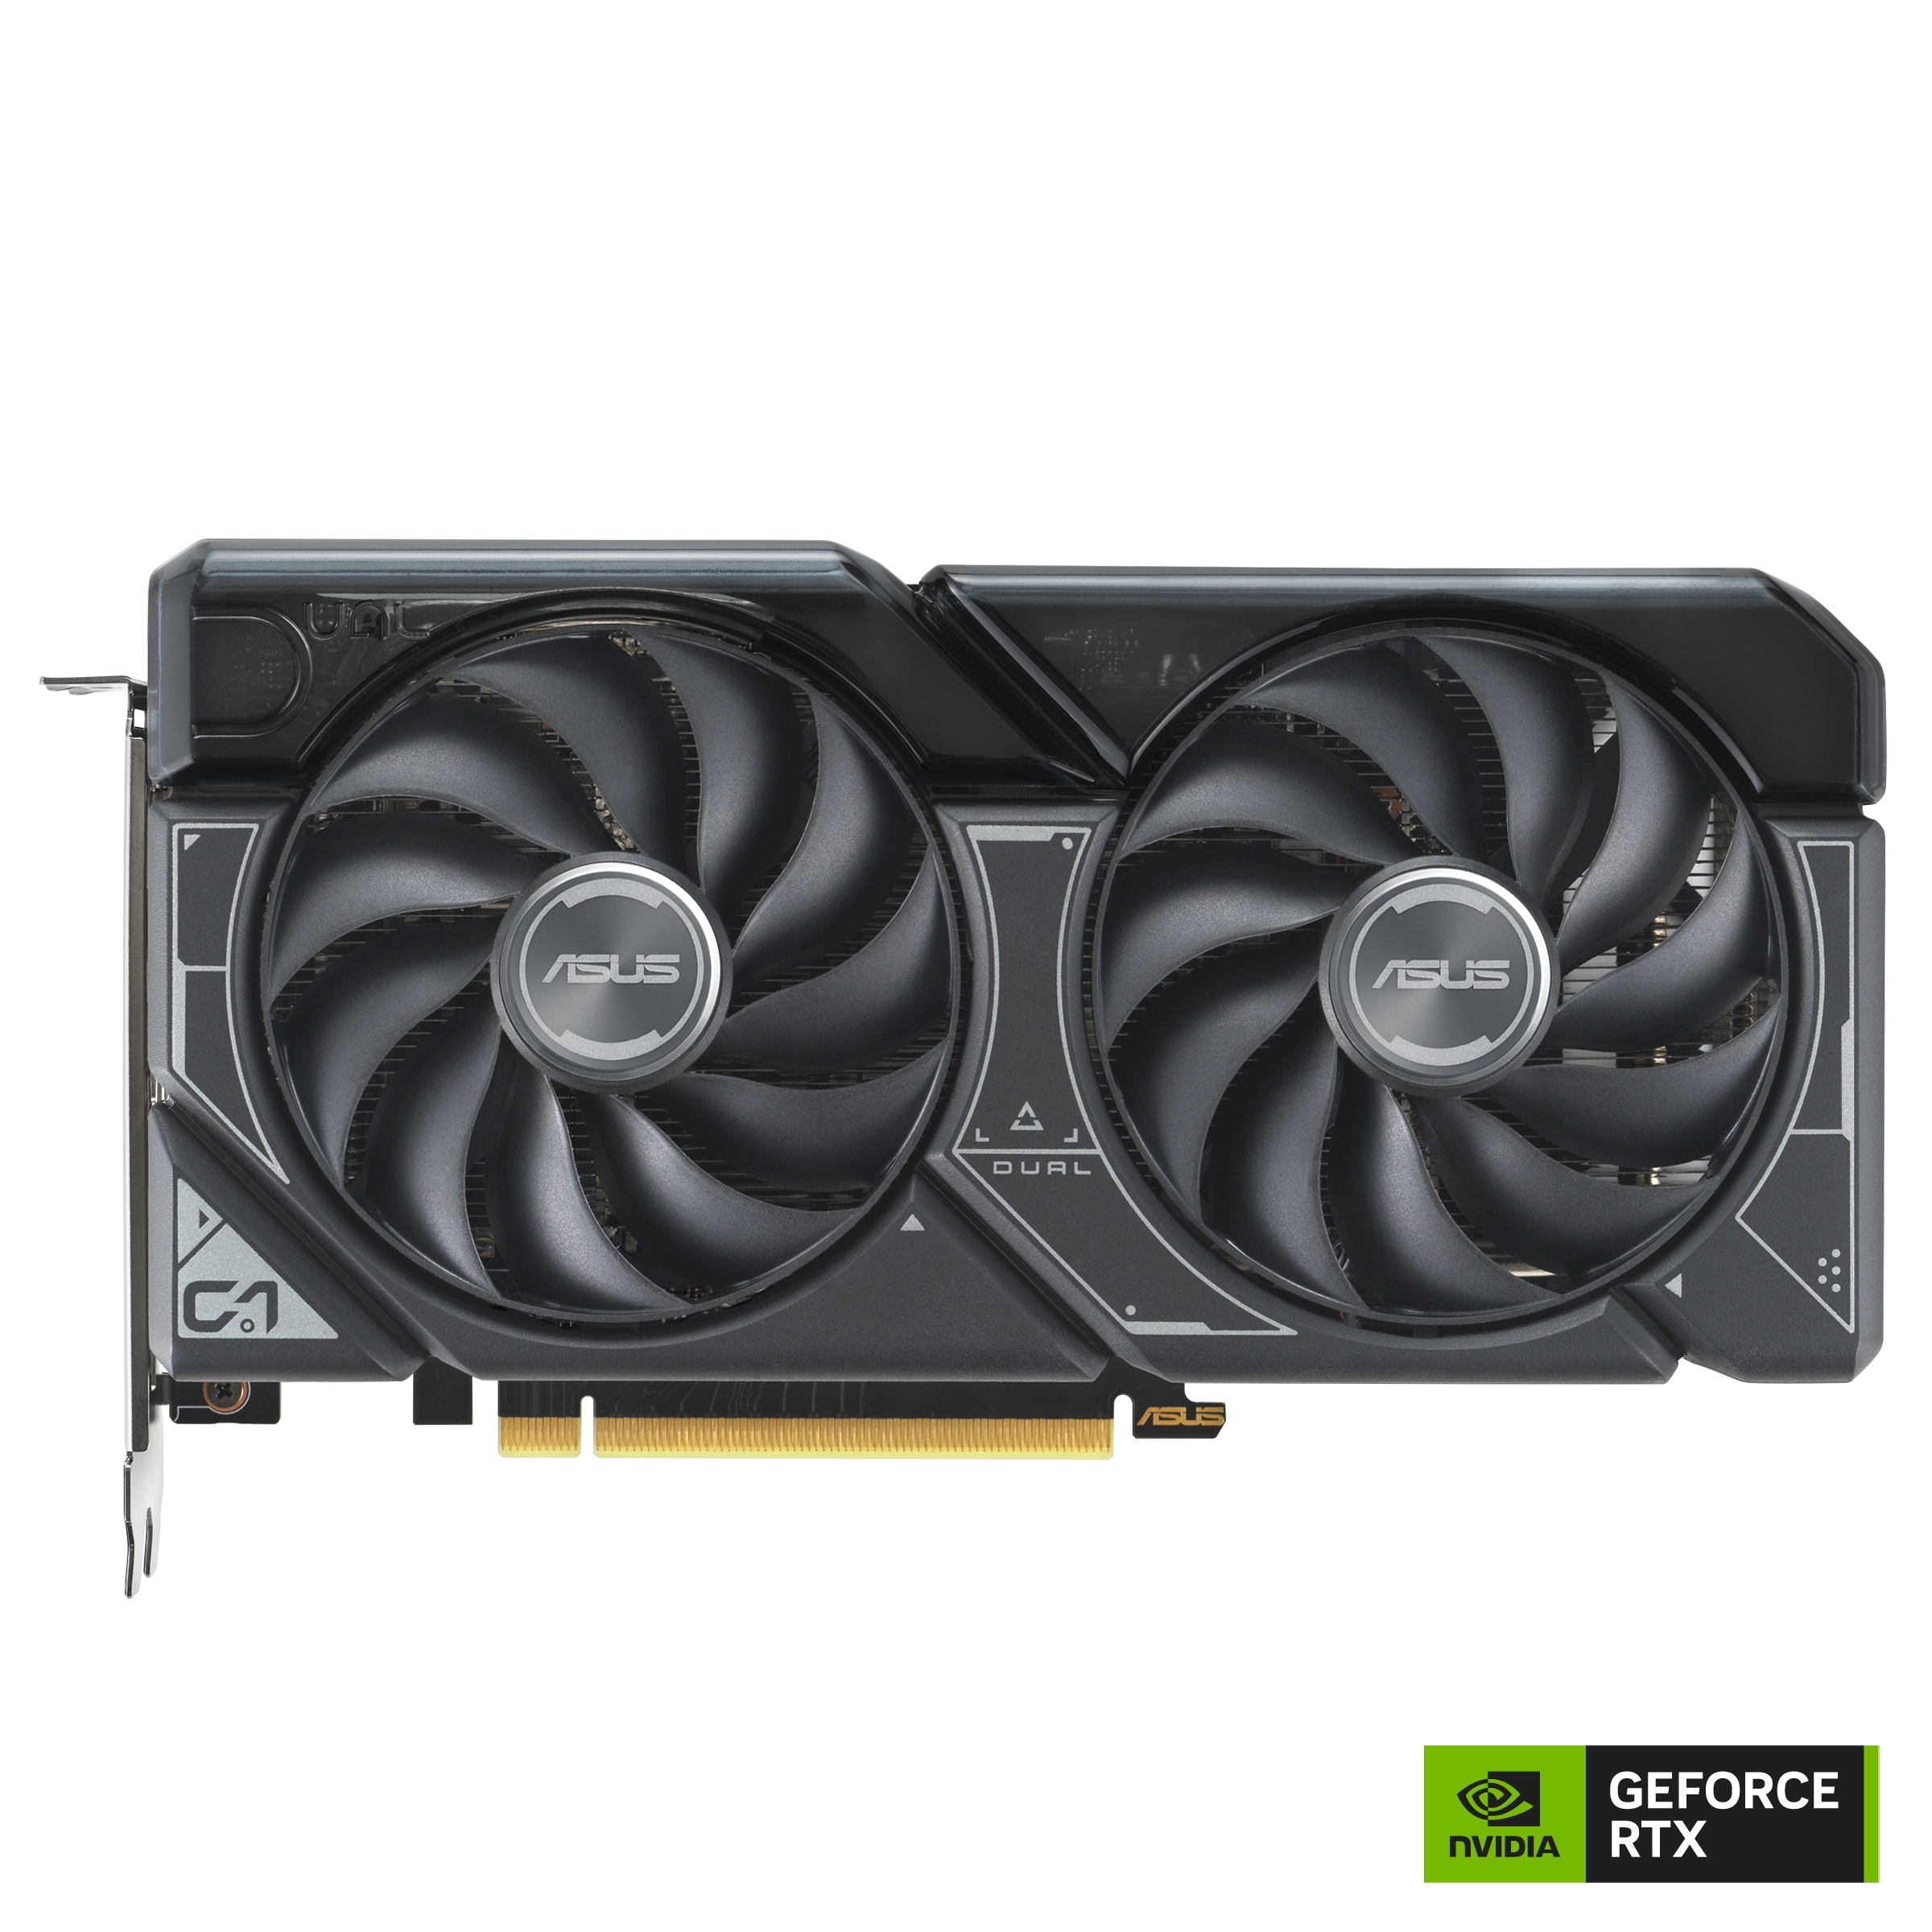 ASUS GeForce RTX 4060 Ti Dual with M.2 Slot Review - Gen 5